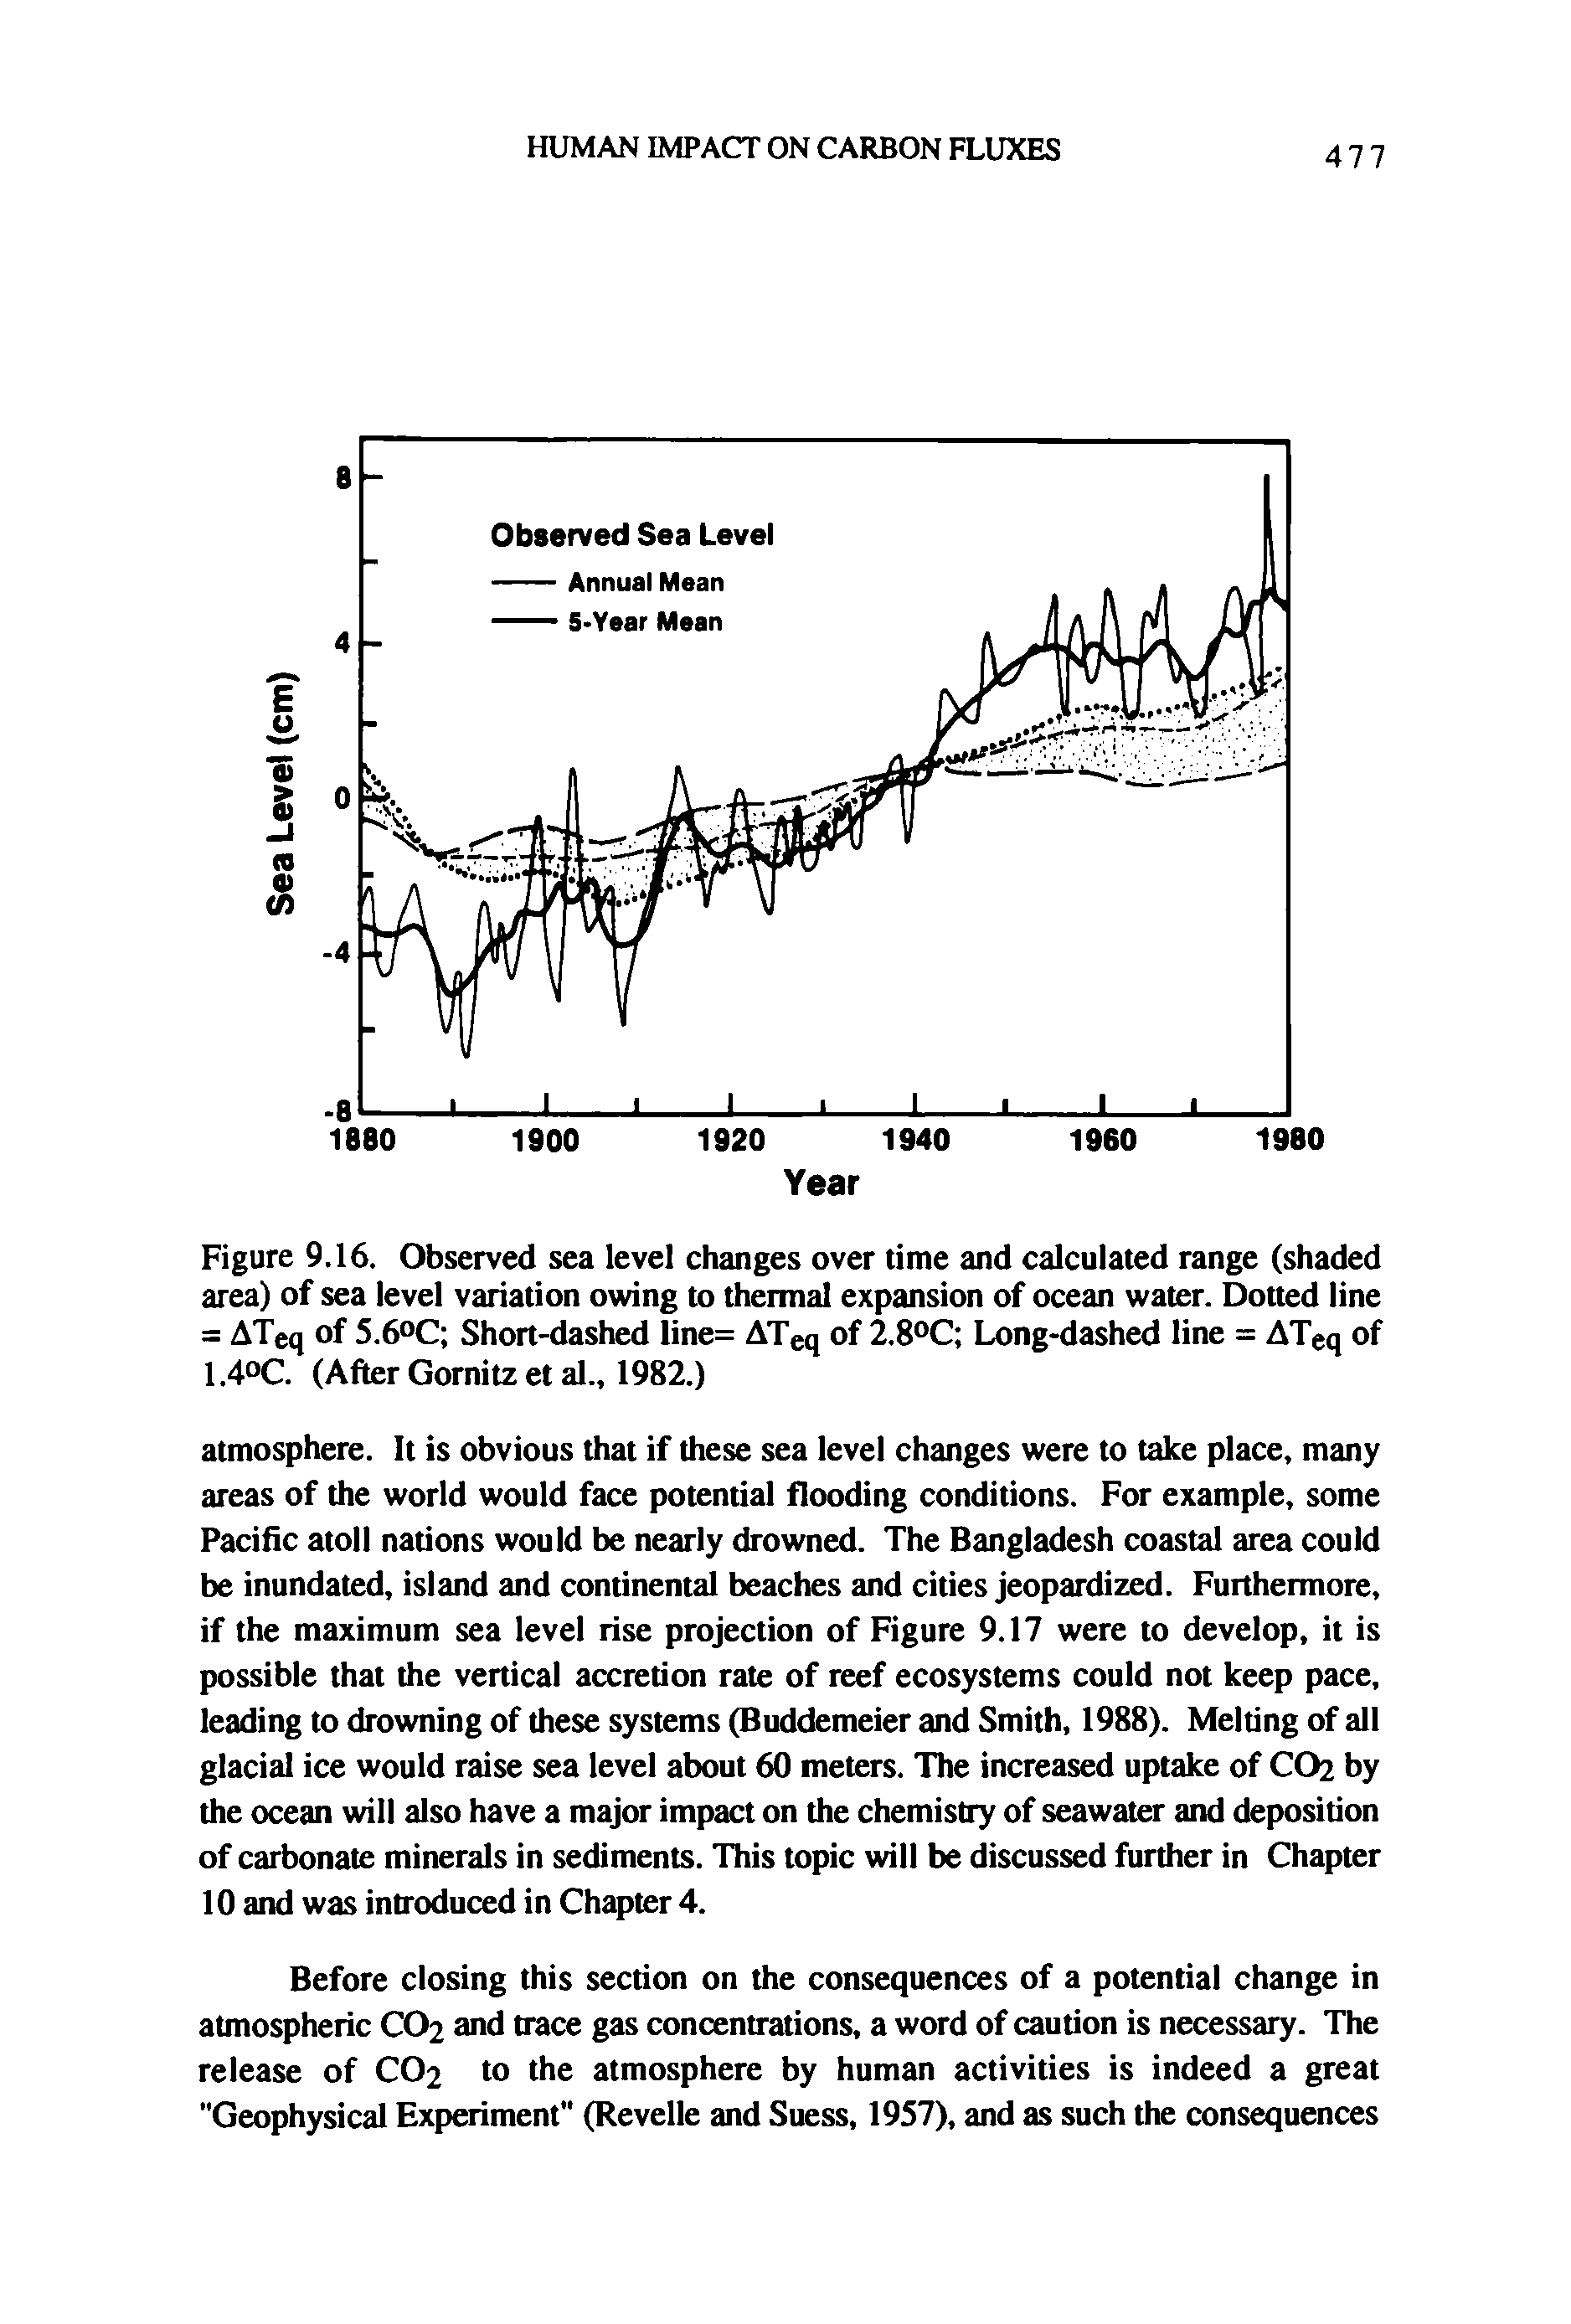 Figure 9.16. Observed sea level changes over time and calculated range (shaded area) of sea level variation owing to thermal expansion of ocean water. Dotted line = ATeq of 5.6°C Short-dashed line= ATeq of 2.8°C Long-dashed line = ATeq of 1.4°C. (After Gornitz et al., 1982.)...